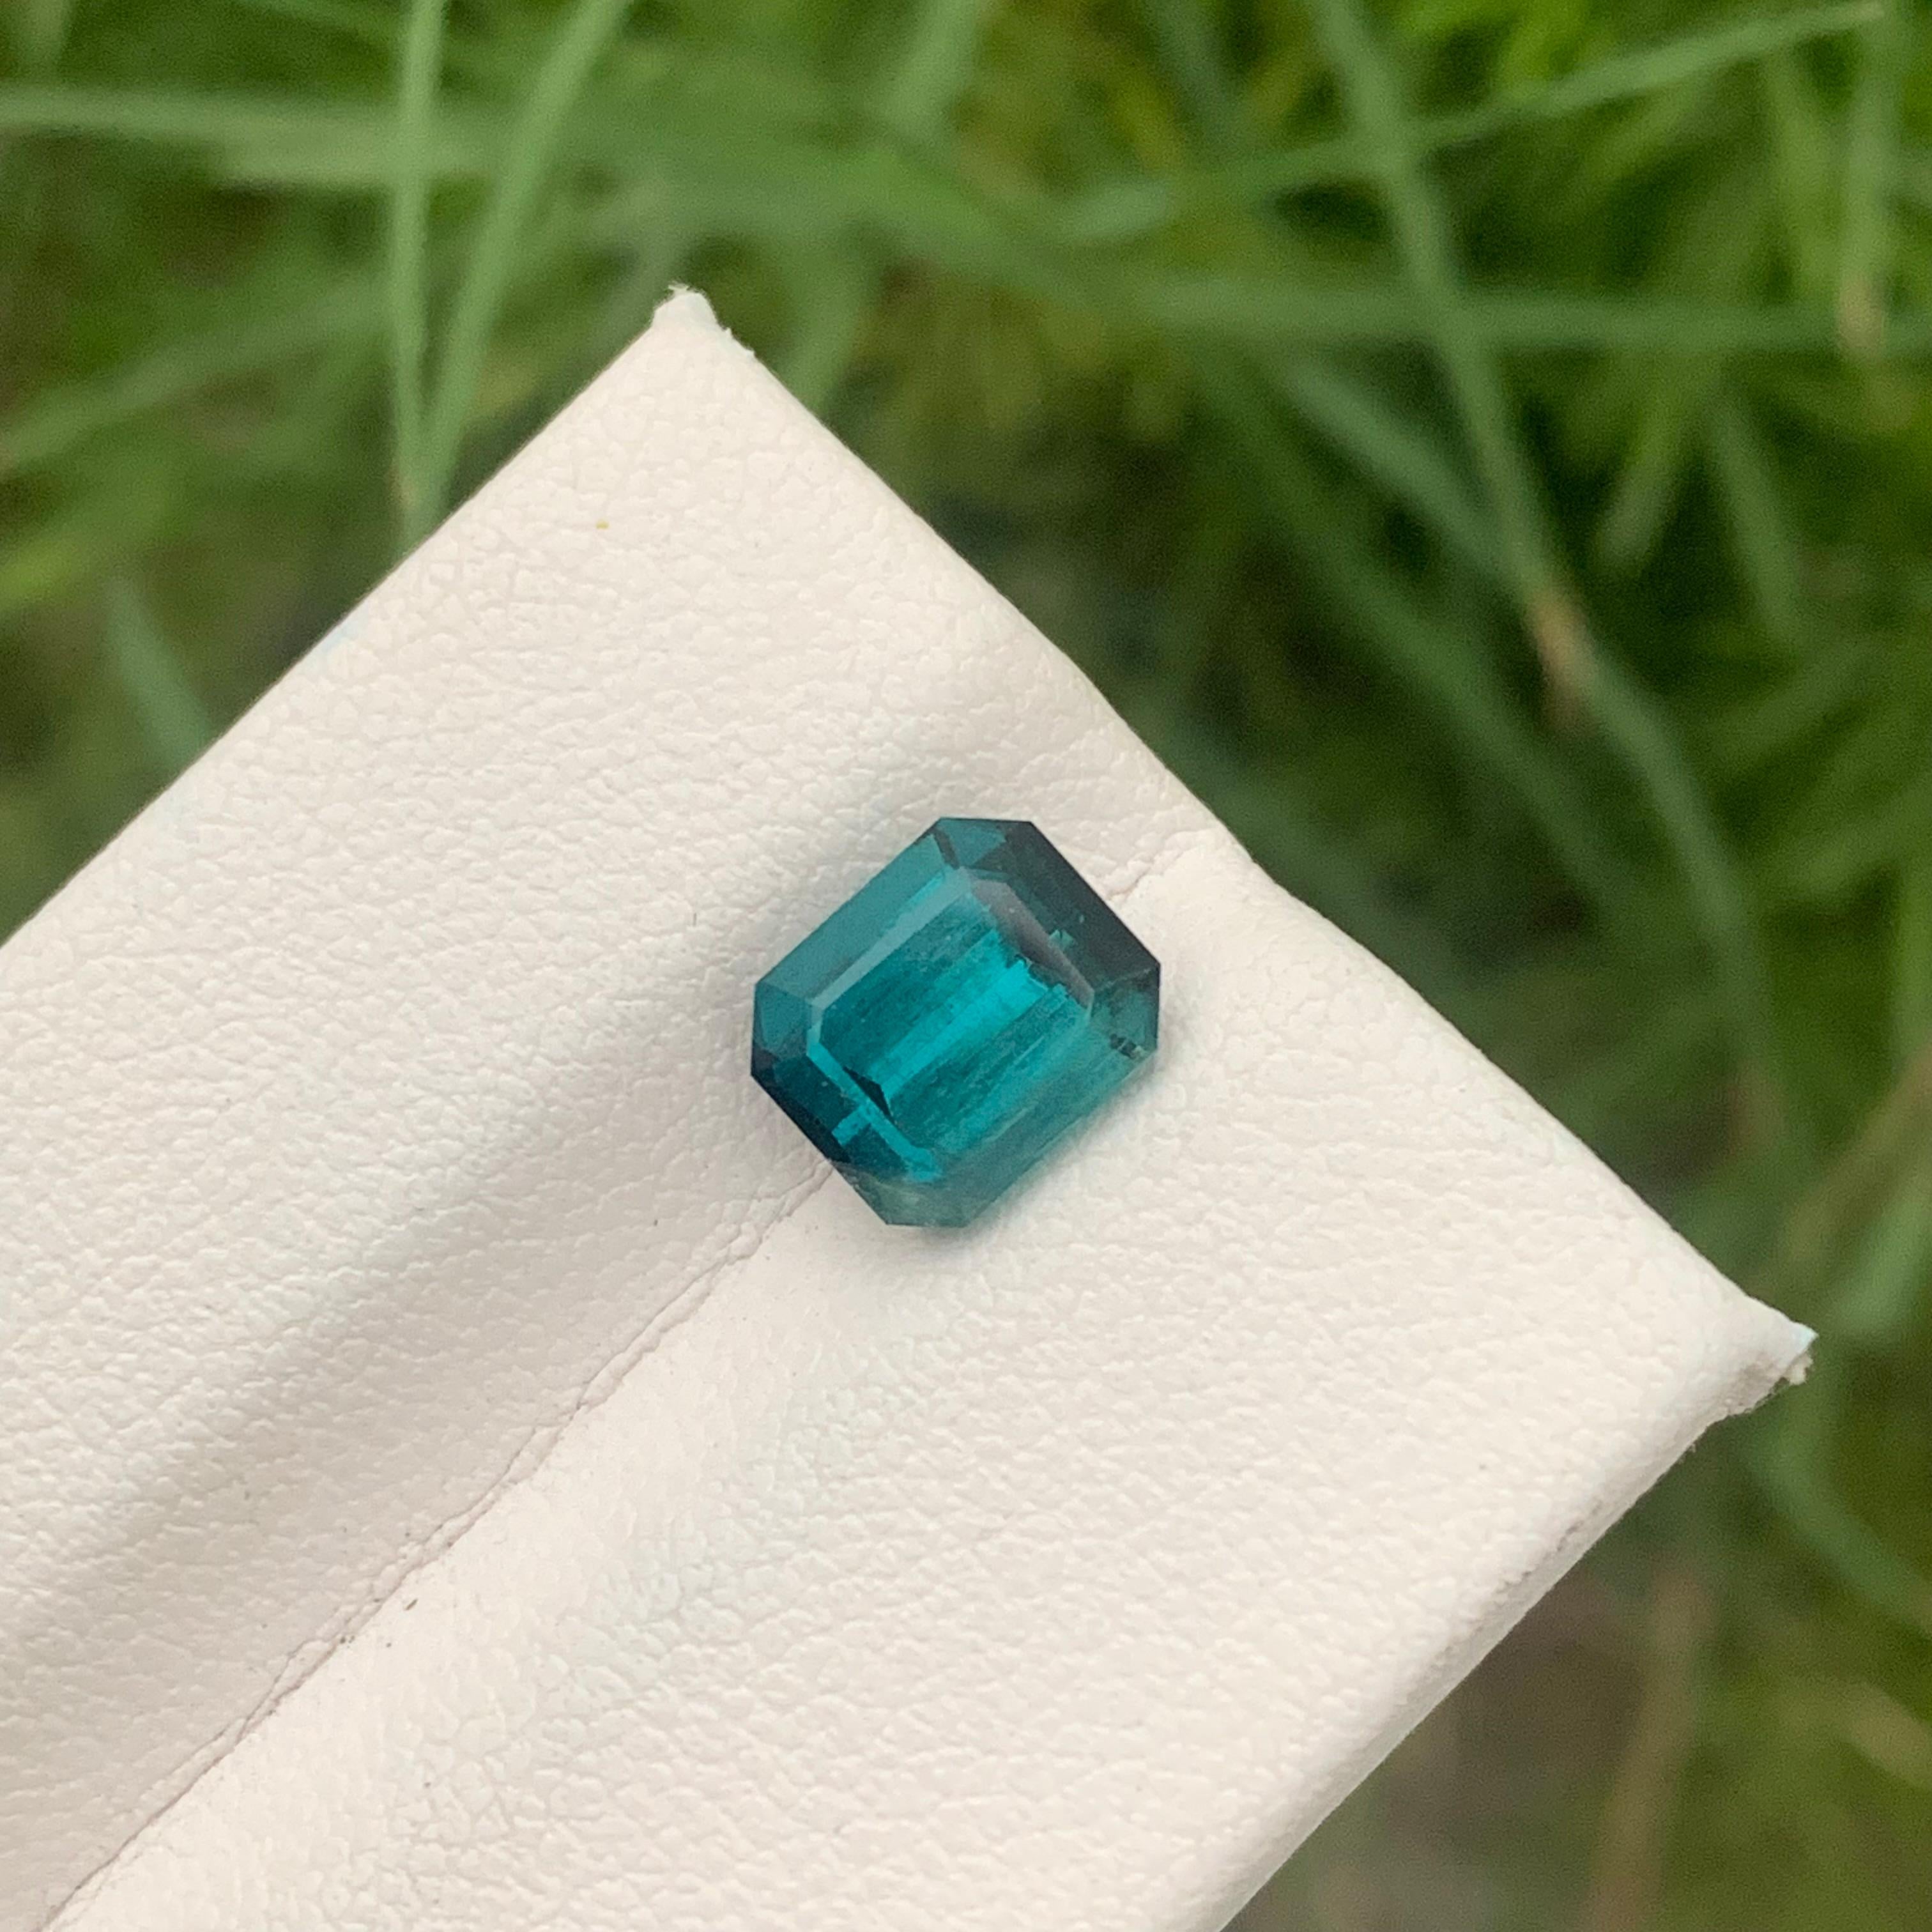 2.75 Carat Included Natural Loose Indicolite Tourmaline Emerald Cut Ring Gem For Sale 5